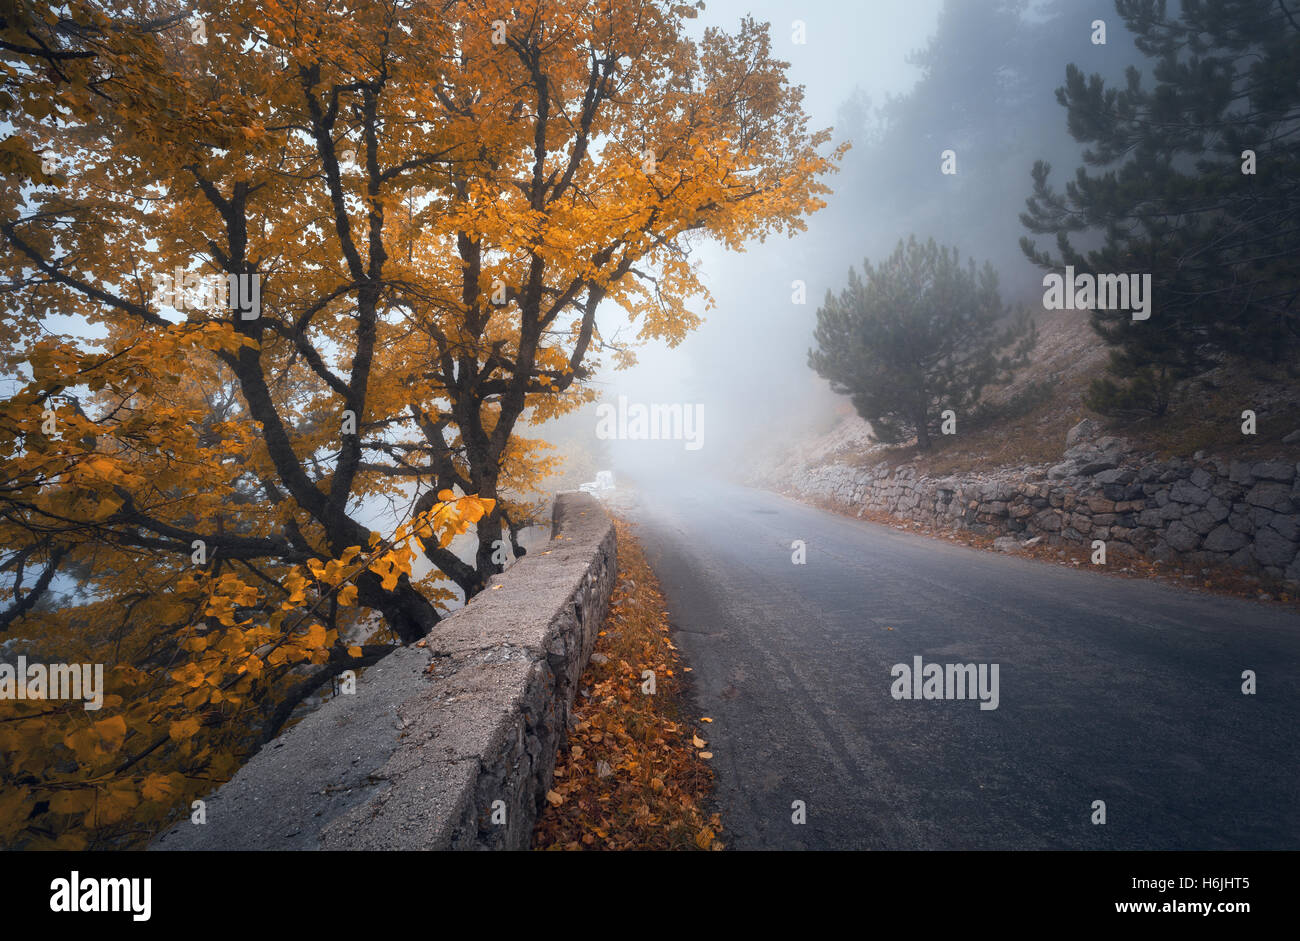 Mystical autumn foggy forest with road. Fall misty woods in fog. Colorful landscape with trees, mountain road, orange and yellow Stock Photo